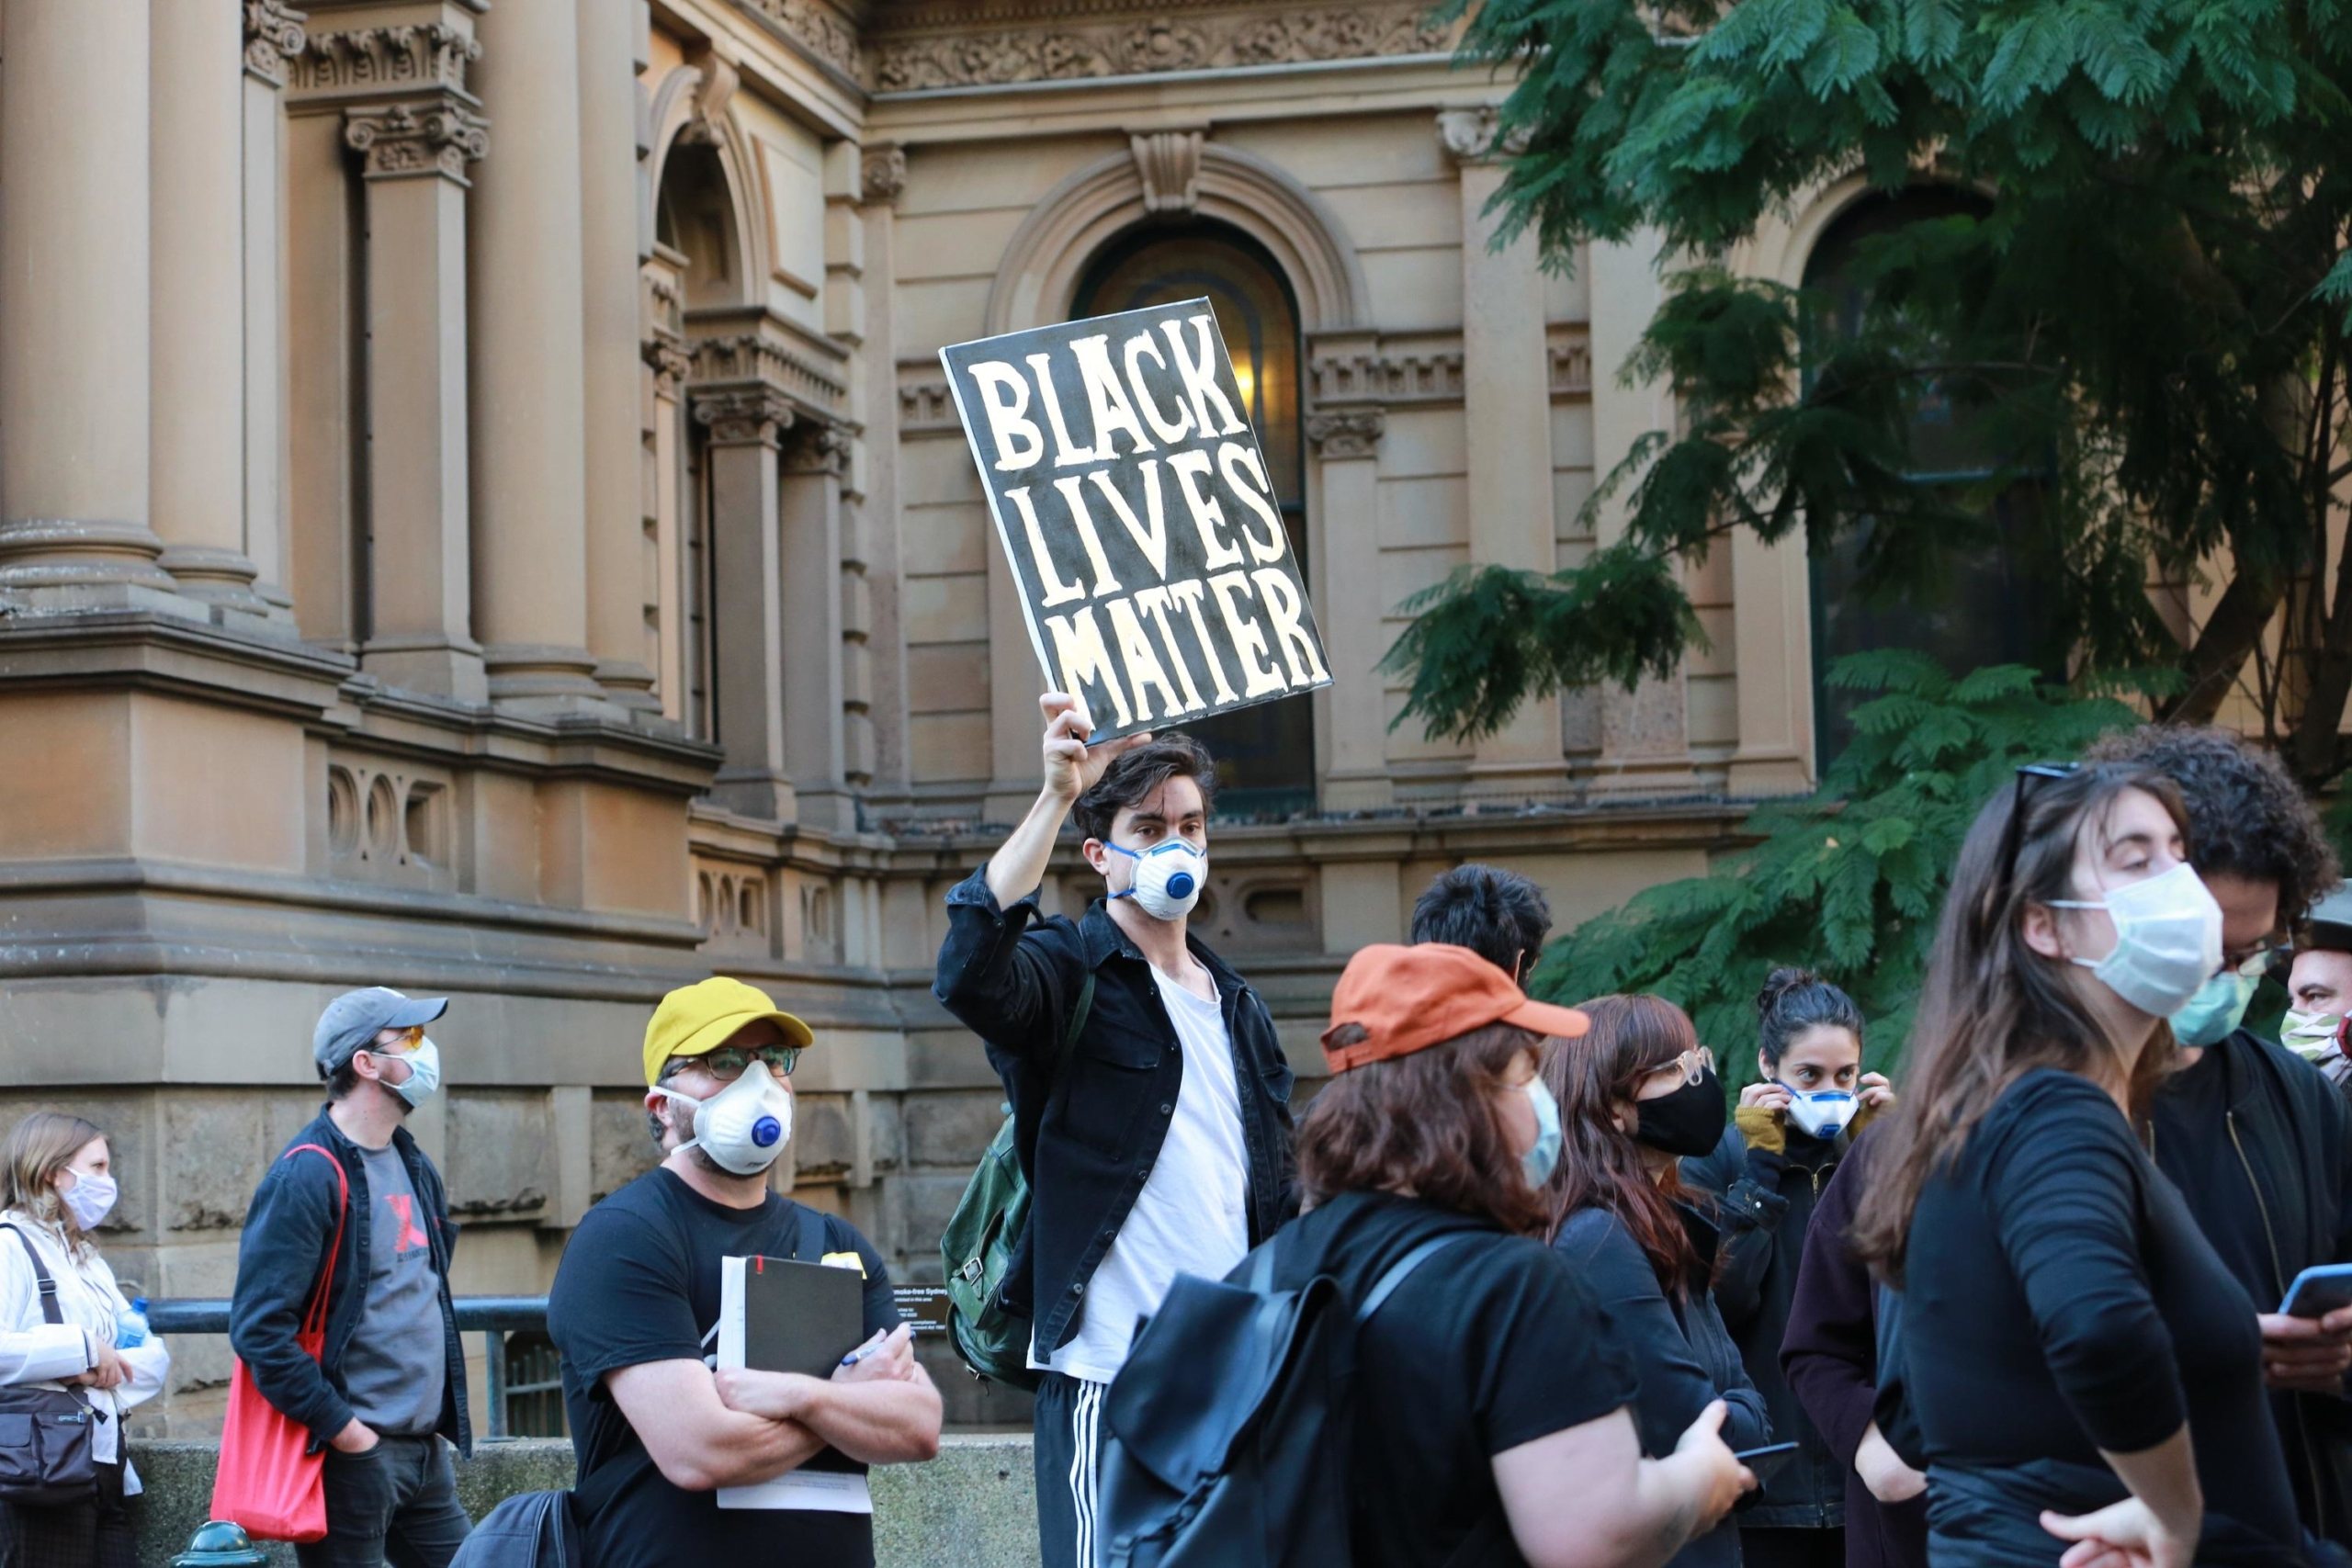 Australians Rally In Solidarity With Black Lives Matter Movement